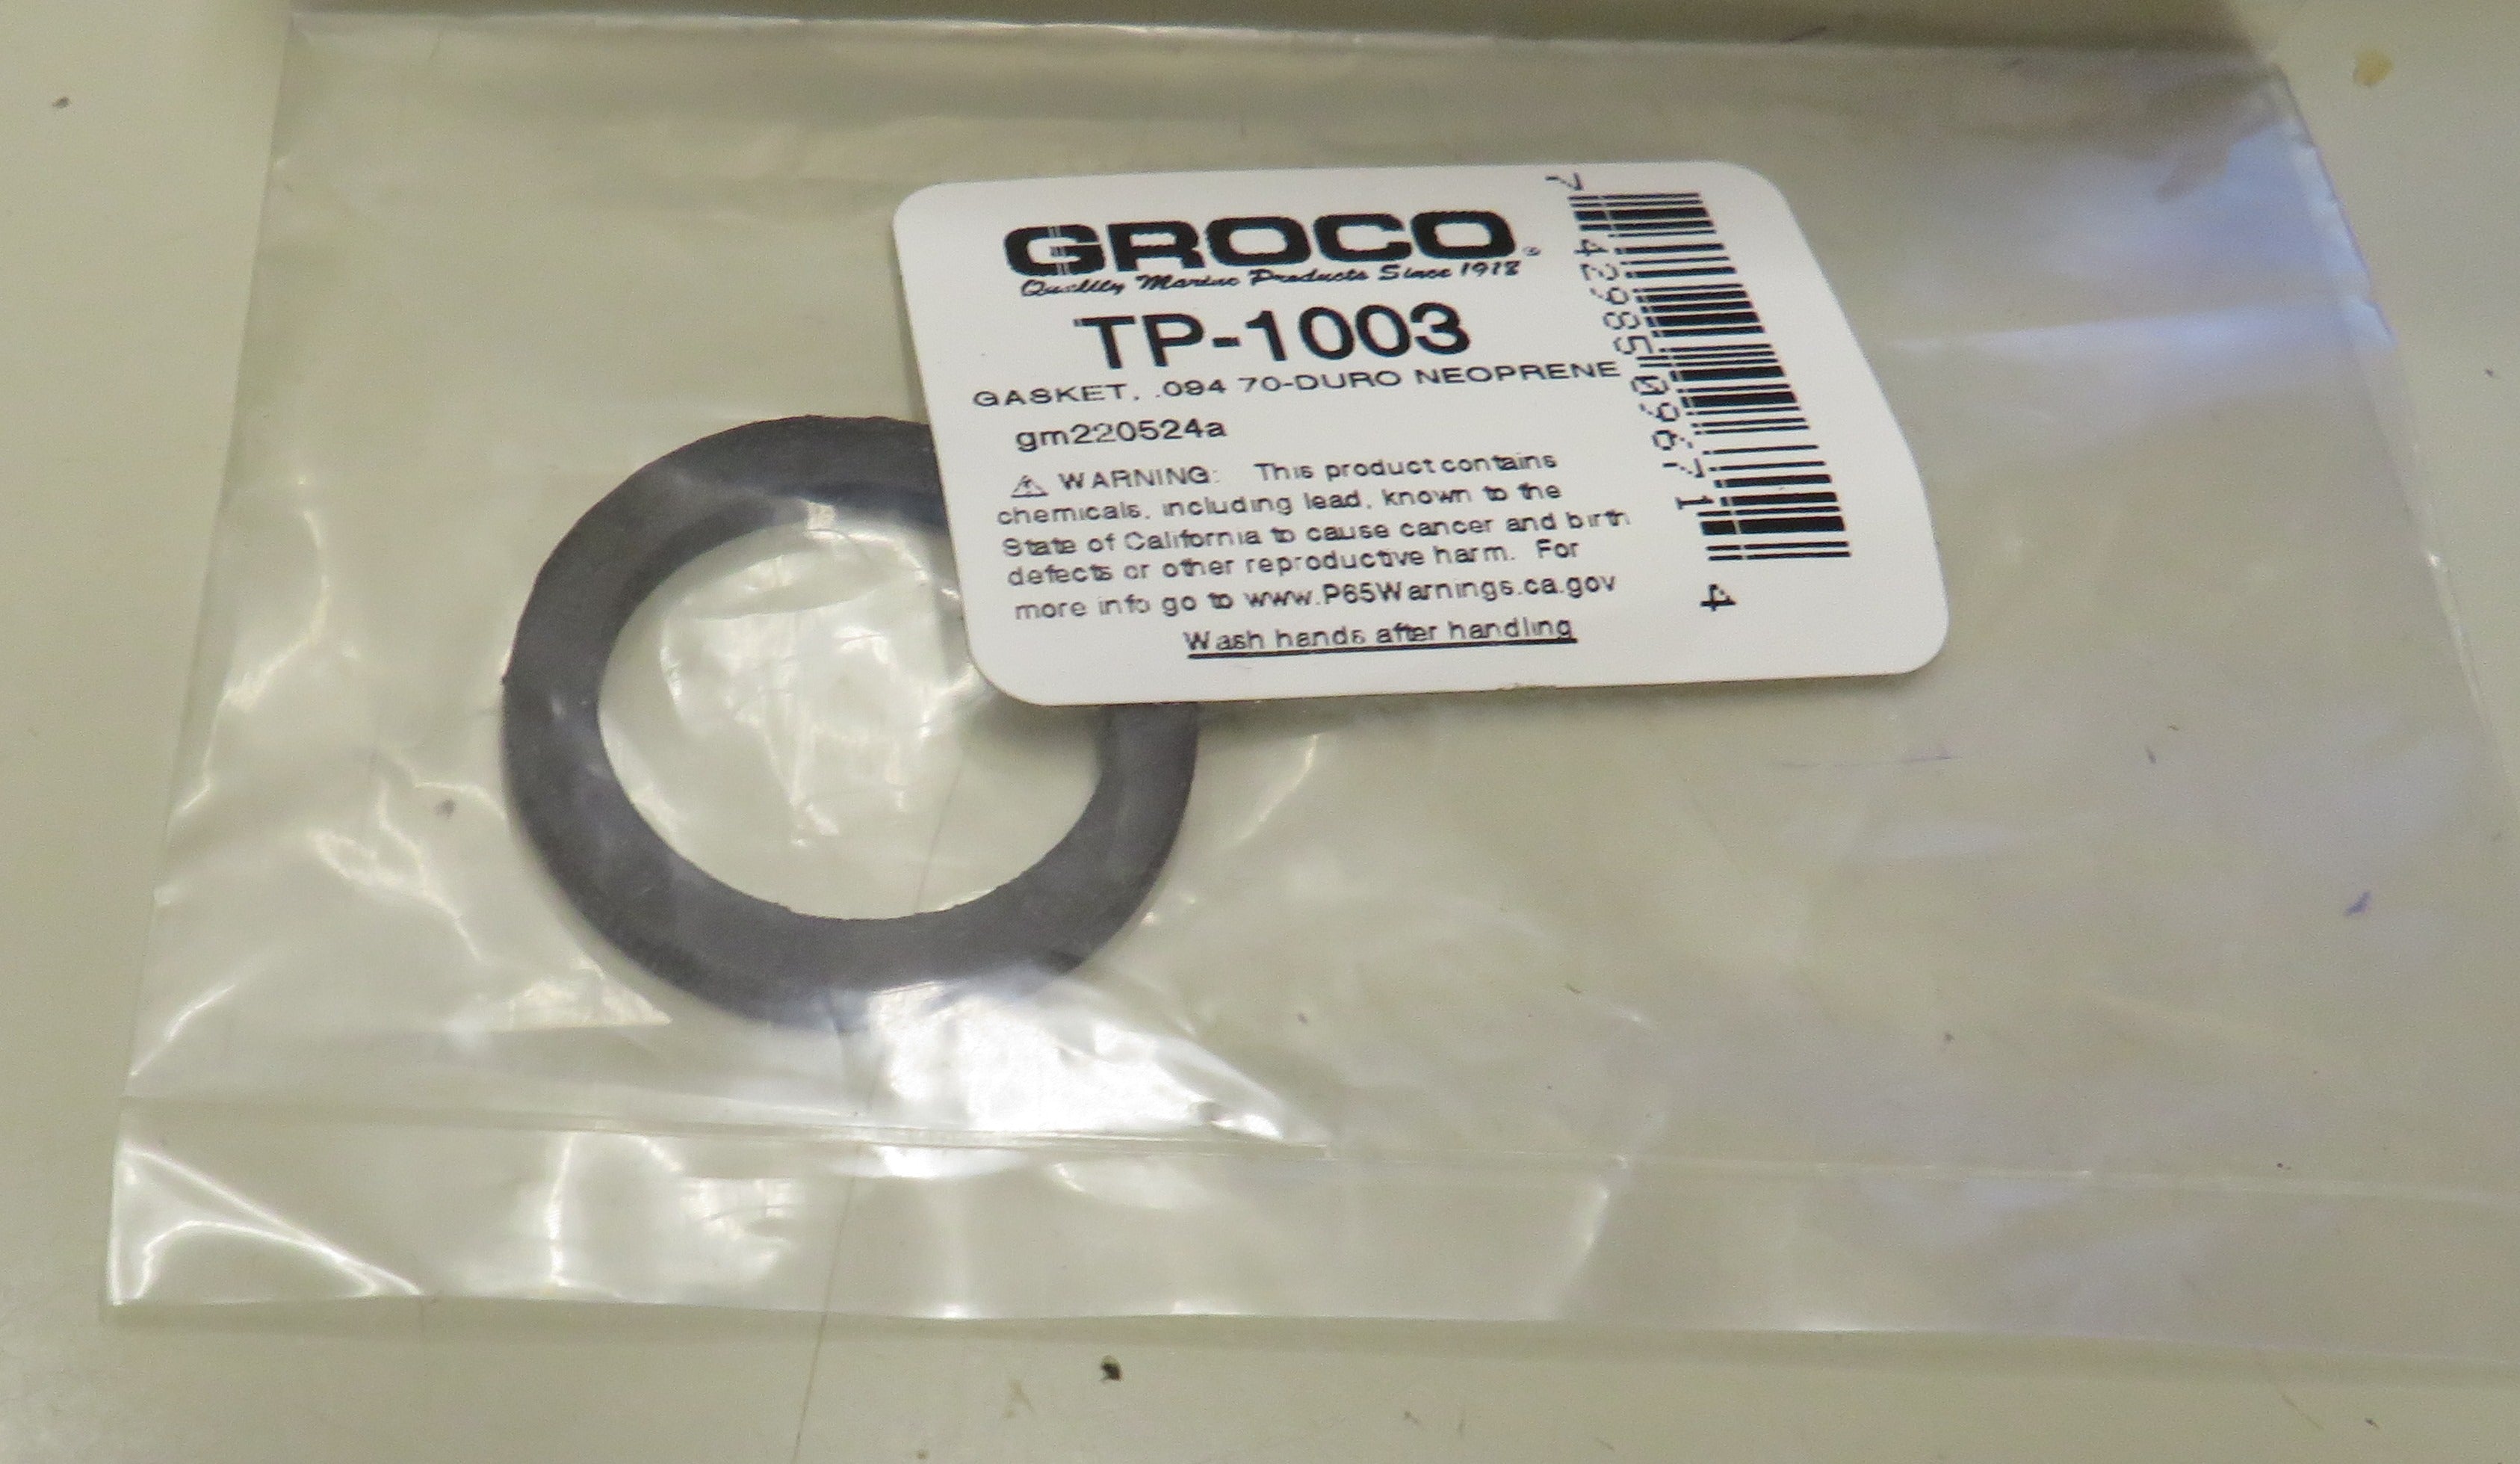 Groco TP-1003 Insert Gasket for the Groco TP-1000 tailpipe 09470 Duro Neoprene  